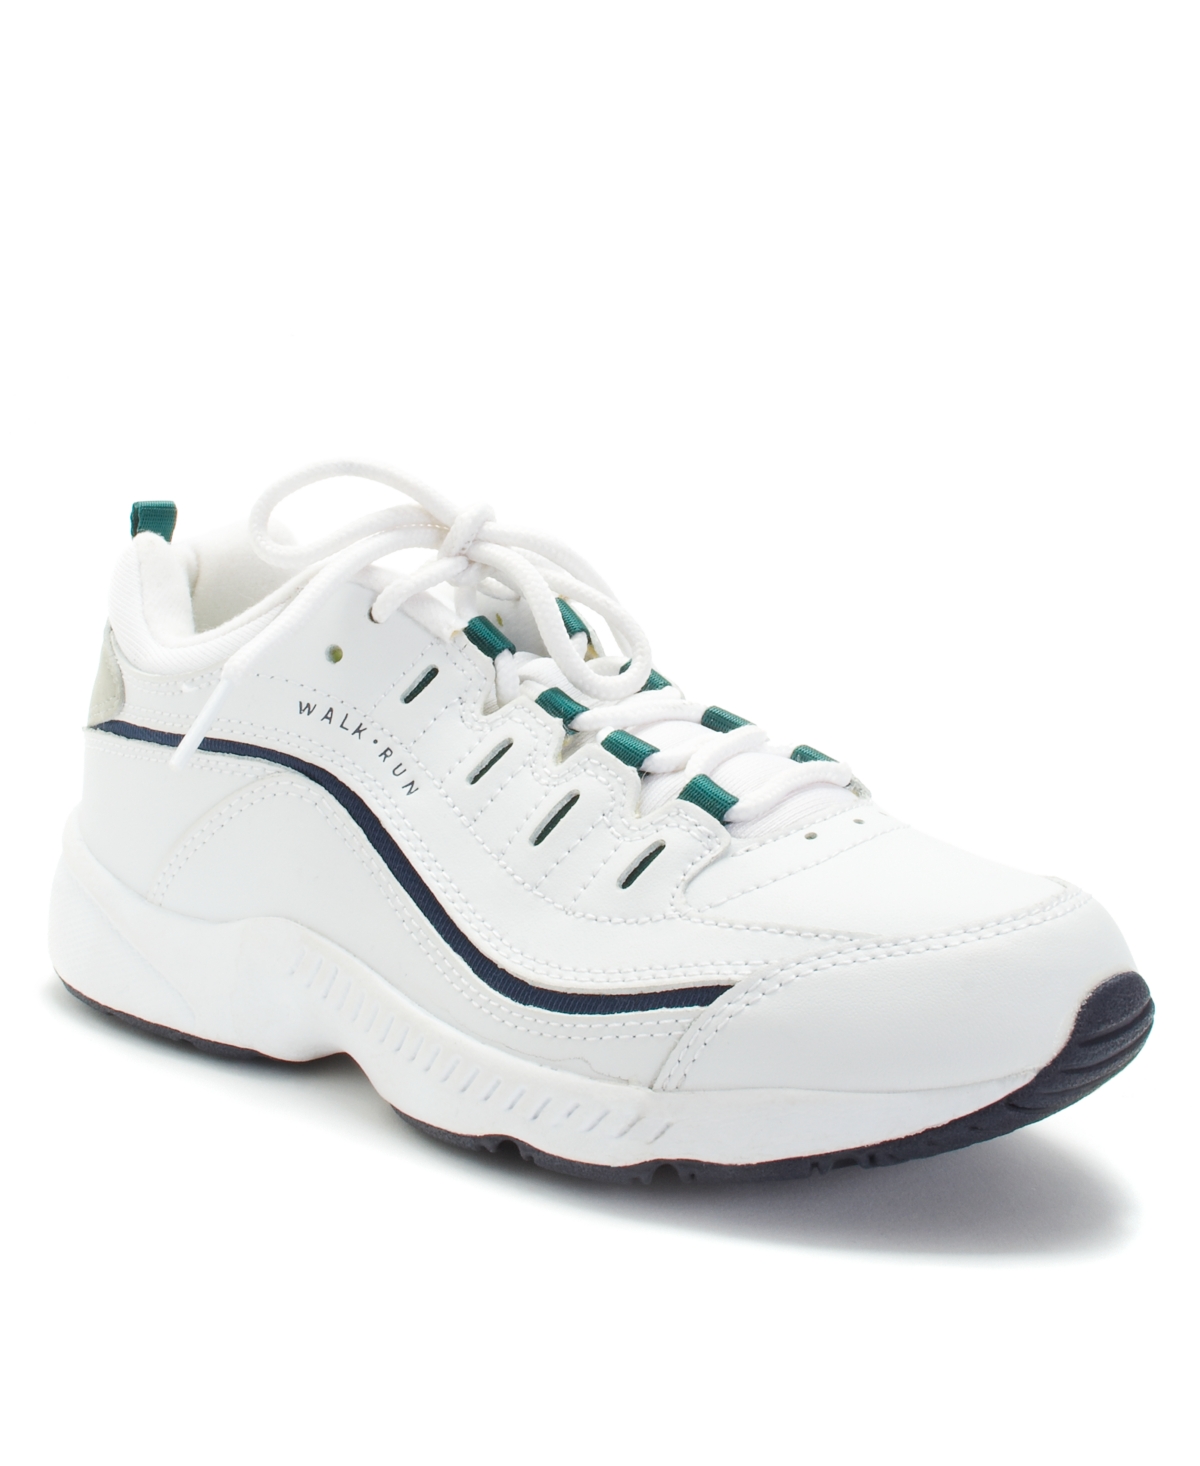 UPC 029005264309 product image for Easy Spirit Women's Romy Round Toe Casual Lace Up Walking Shoes Women's Shoes | upcitemdb.com